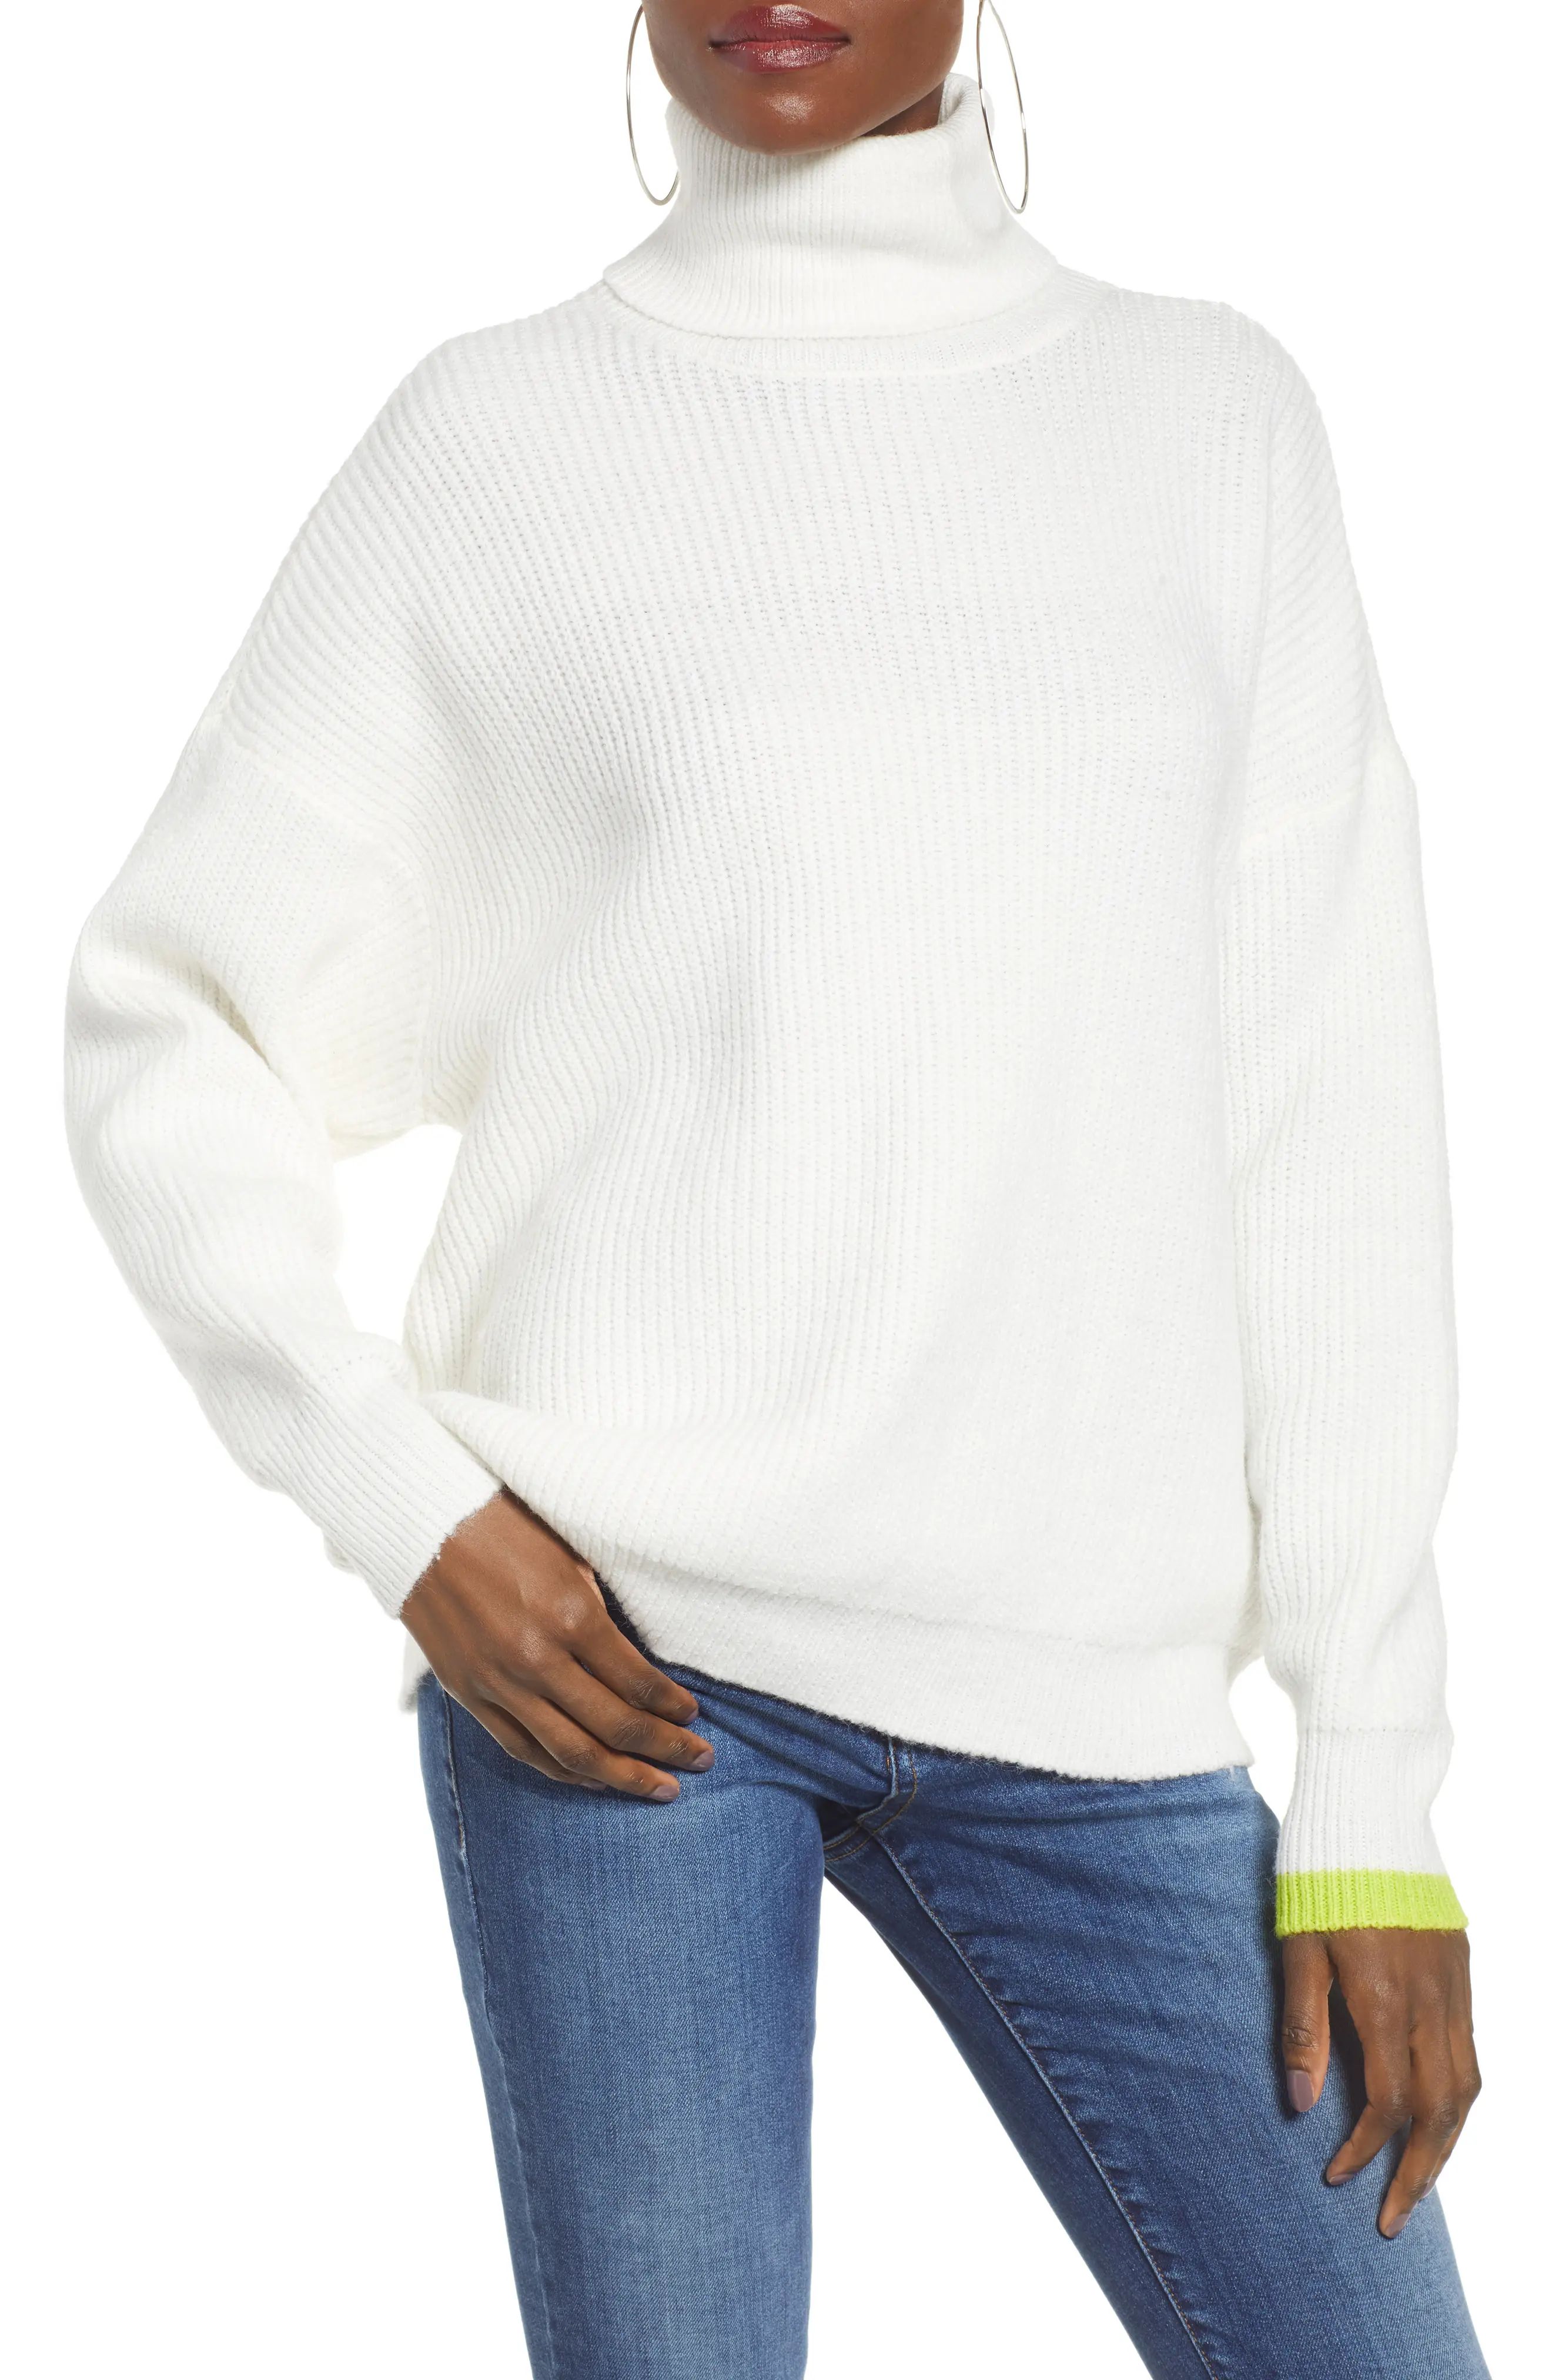 Women's Noisy May Ridley Turtleneck Sweater, Size Small - White | Nordstrom